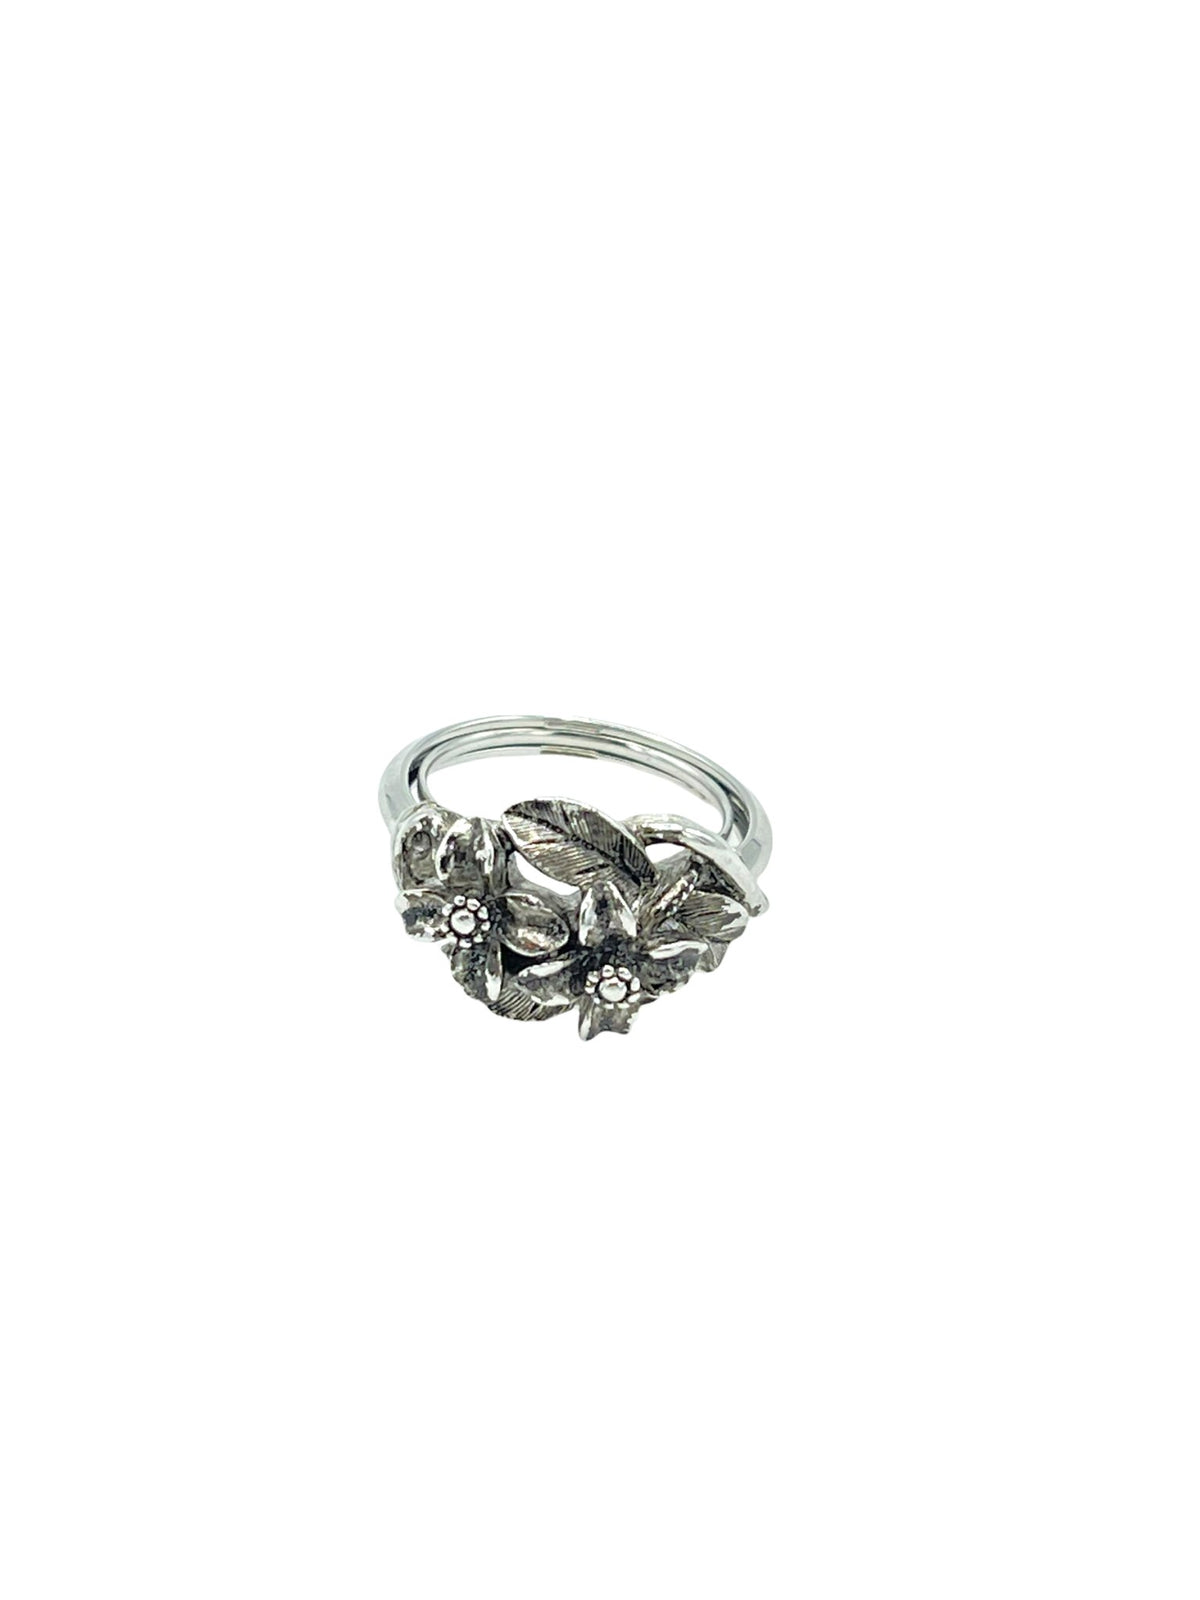 Avon Silver Floral Vintage Adjustable Cocktail Ring - 24 Wishes Vintage Jewelry